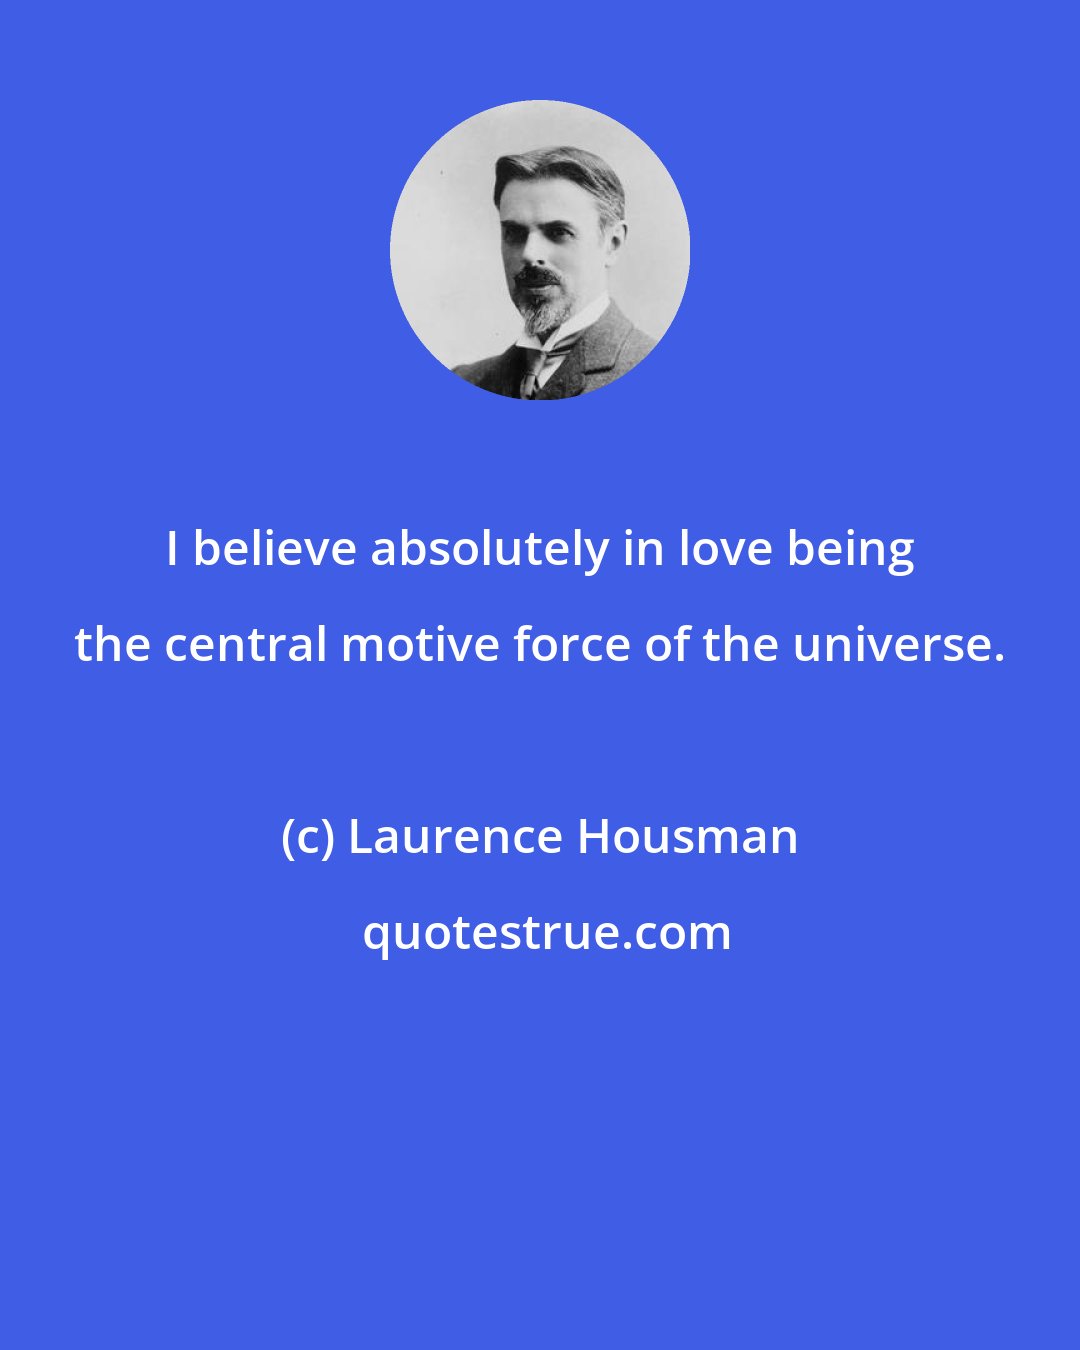 Laurence Housman: I believe absolutely in love being the central motive force of the universe.